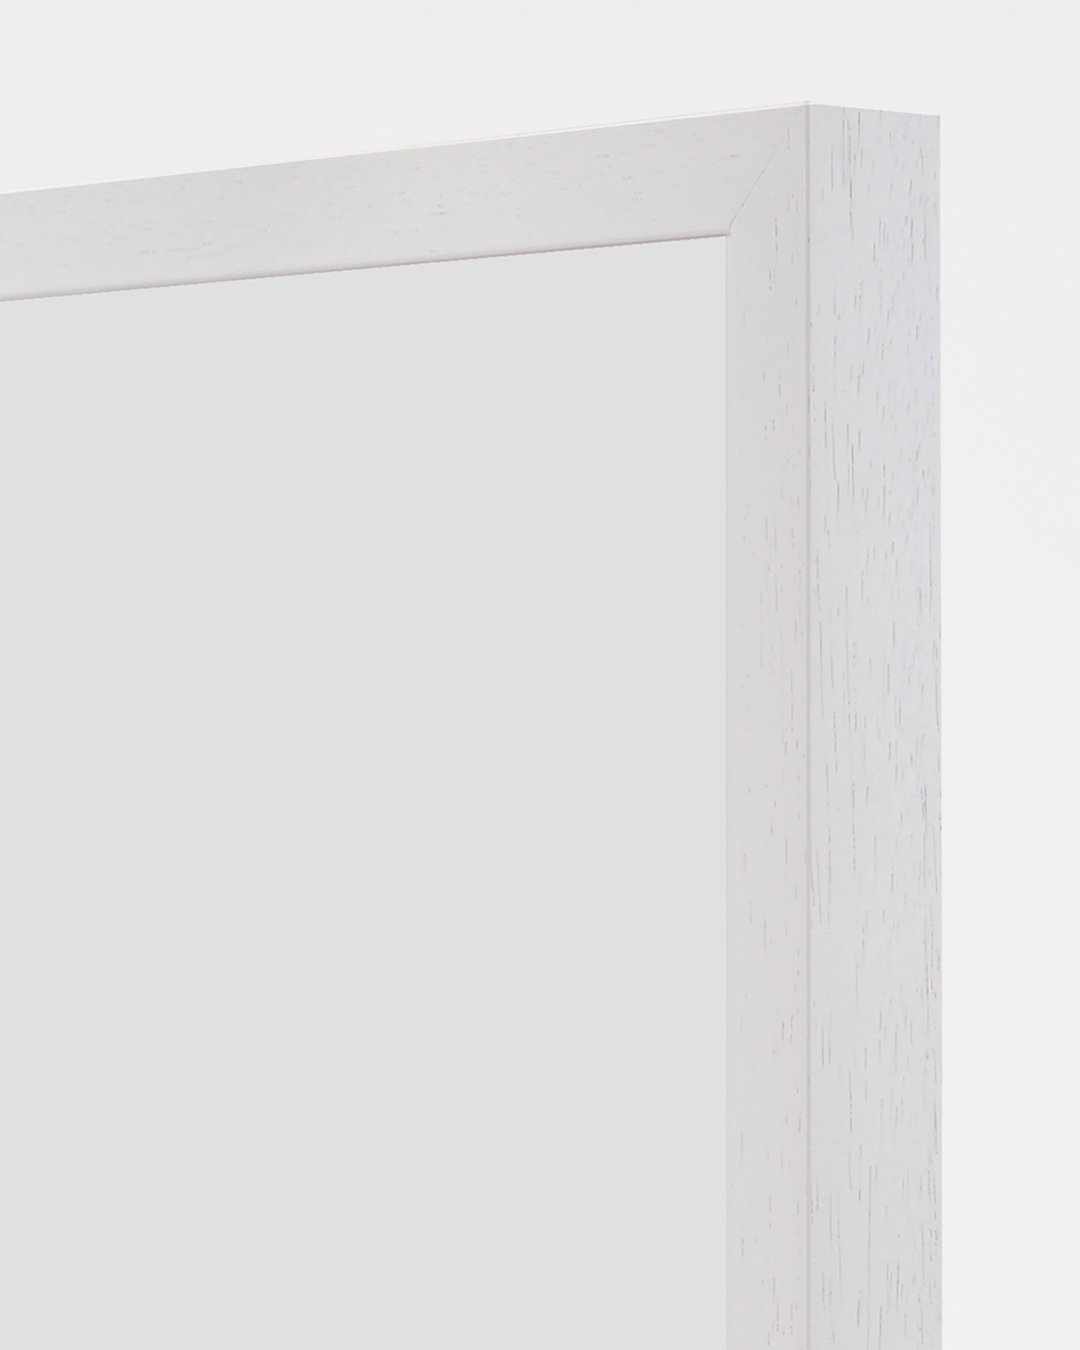 White Picture Frame (Wood Grain), A3 Size Photo Frame